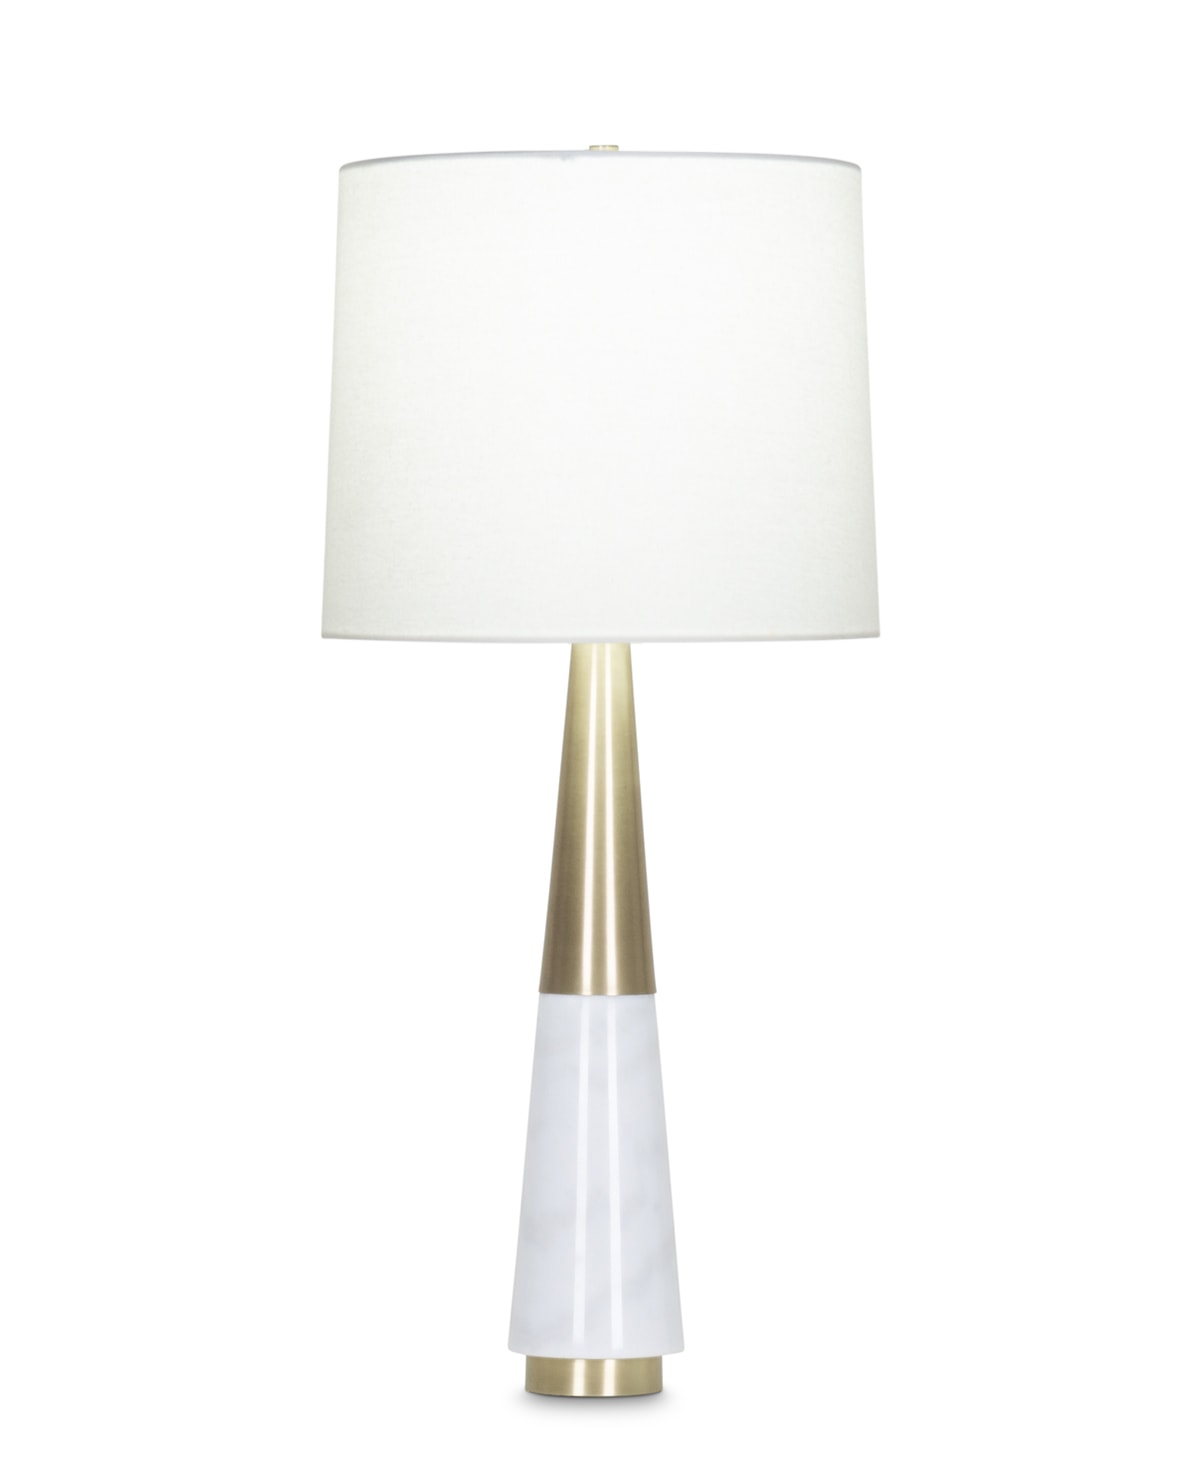 FlowDecor Brody Table Lamp in white marble and metal with antique brass finish and off-white linen tapered drum shade (# 3978)